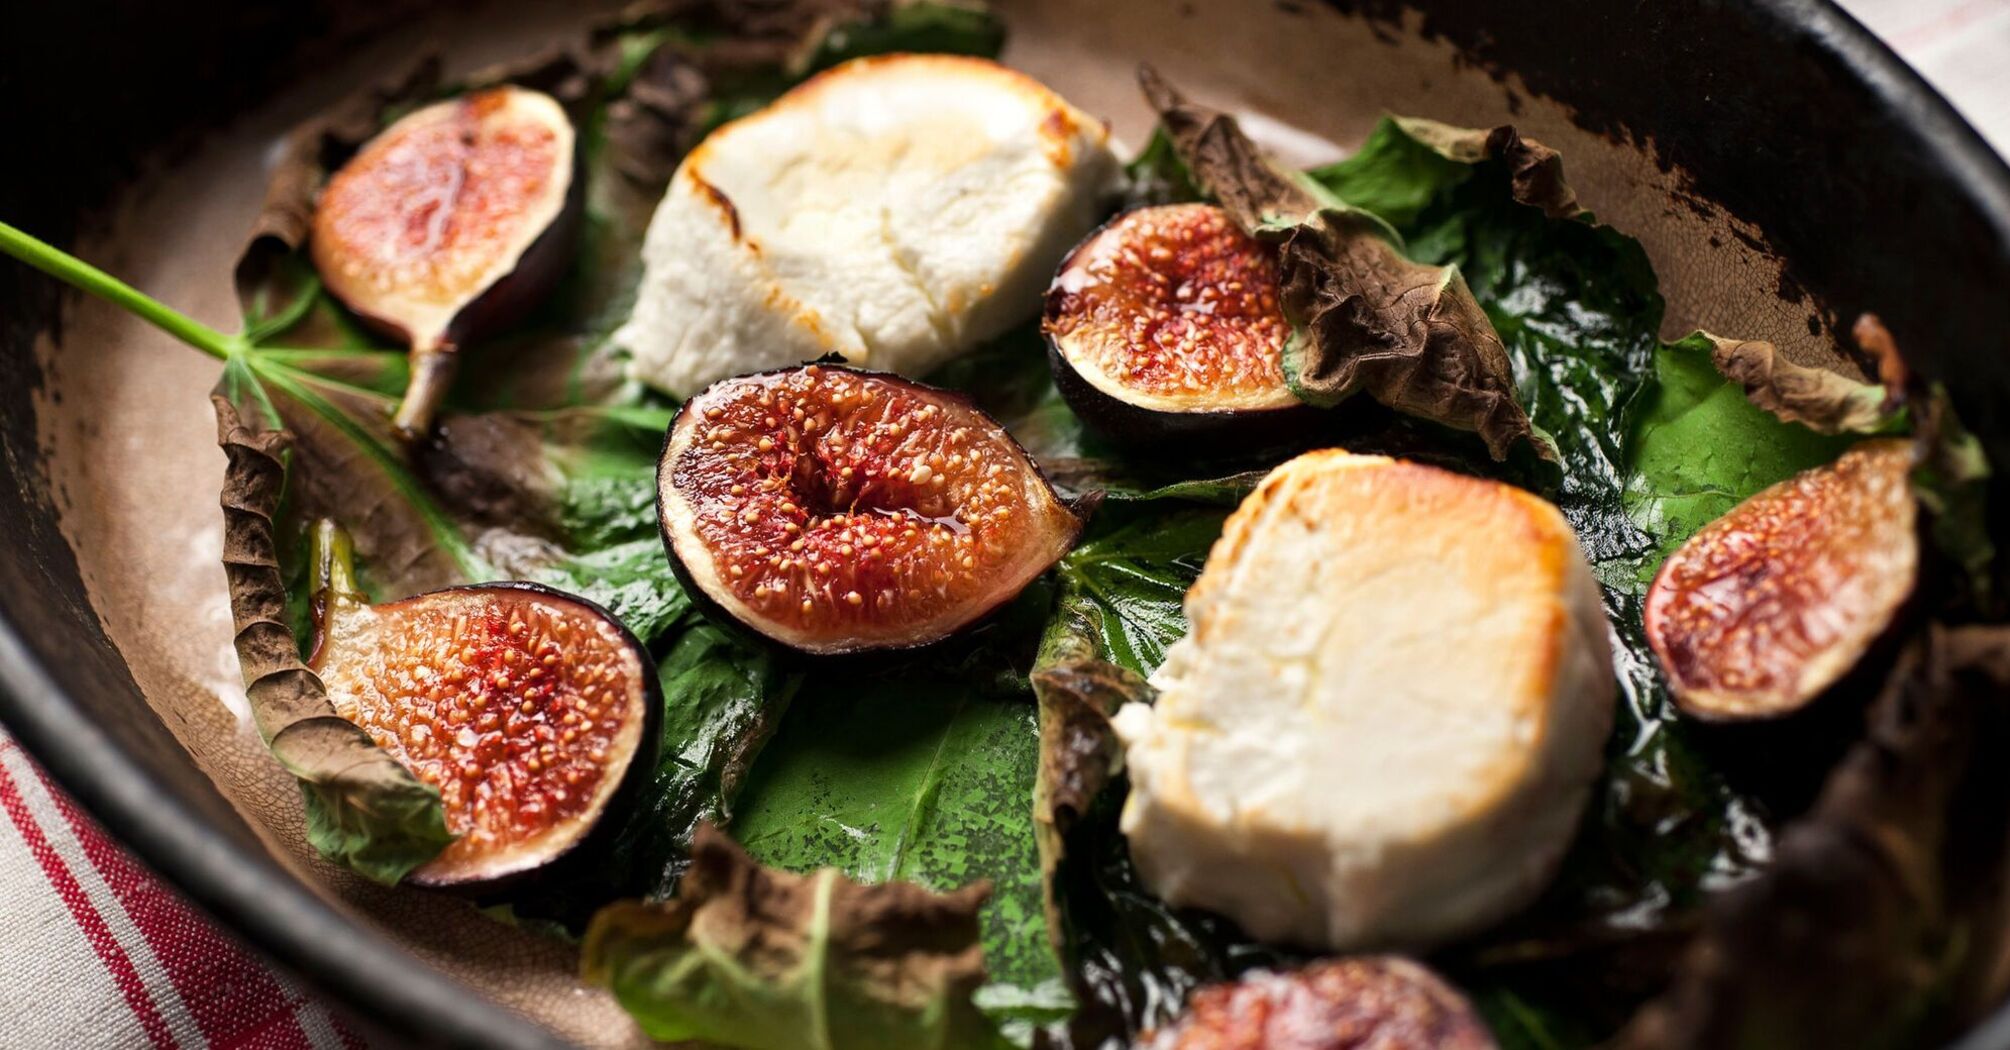 How to cook figs deliciously: an idea for a spectacular appetizer